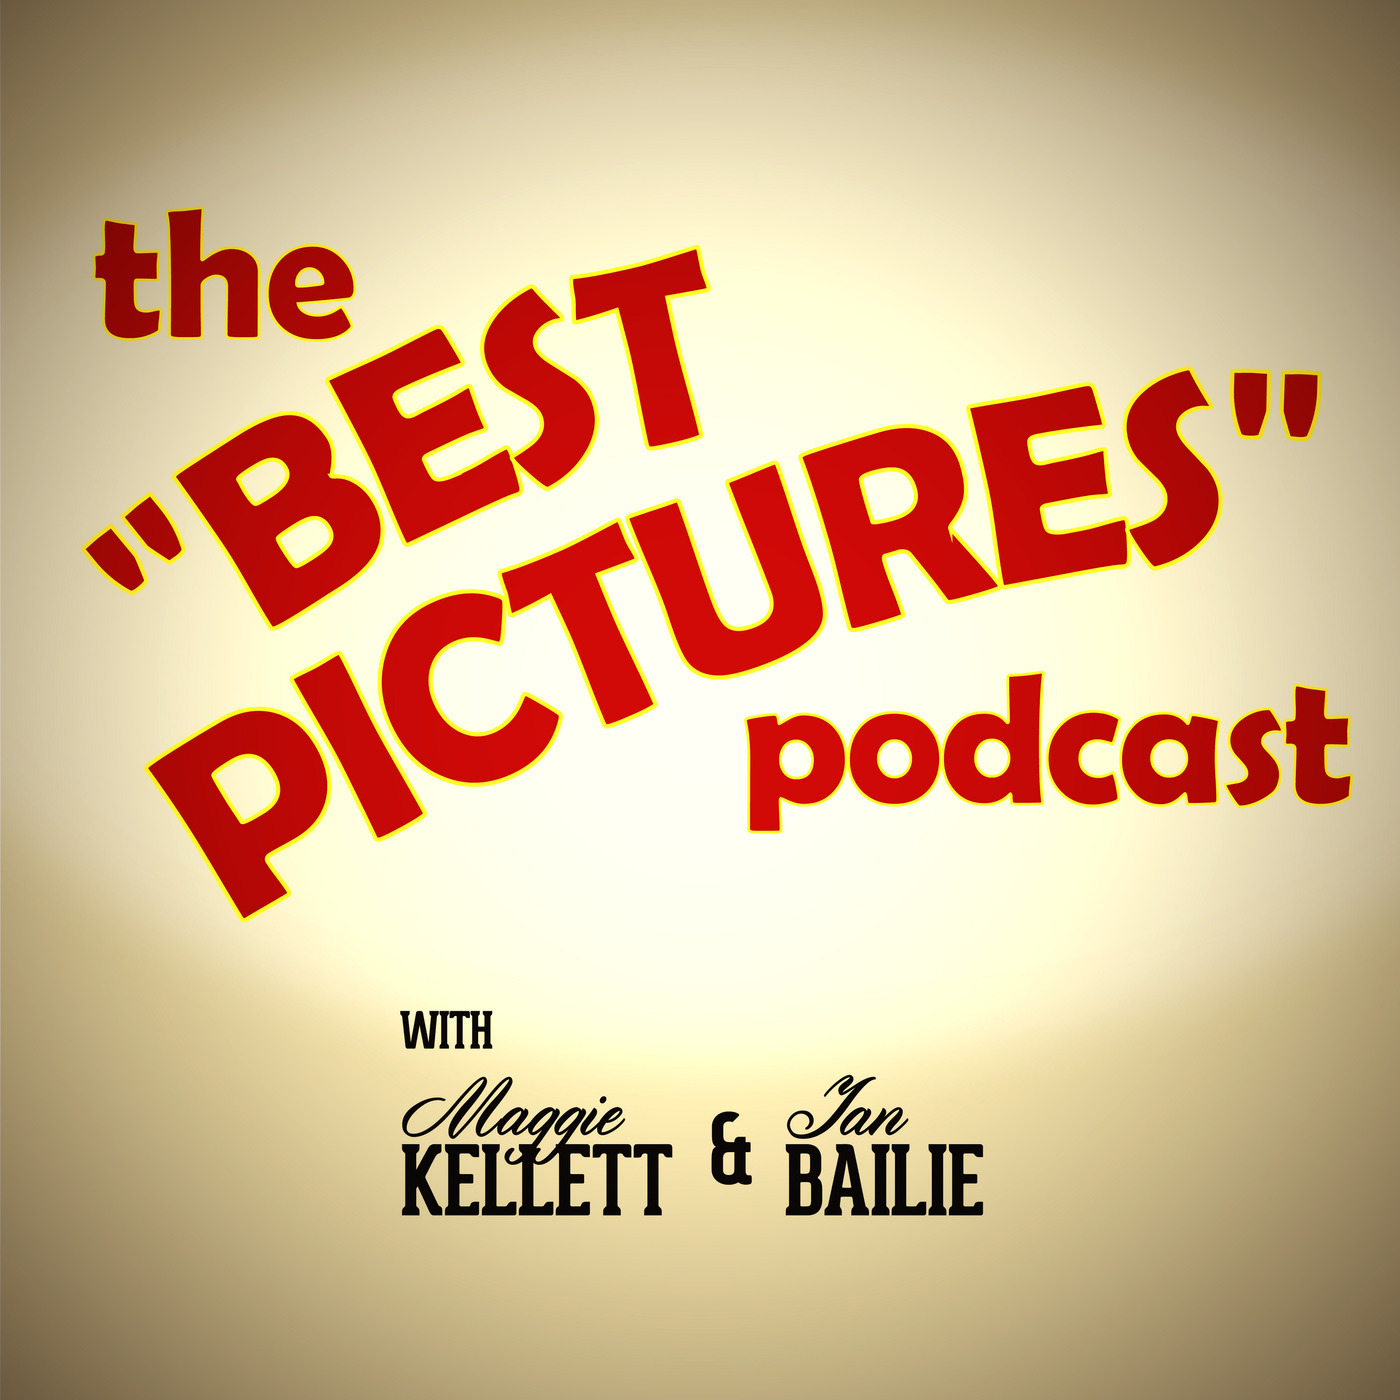 The Best Pictures Podcast: 69th Academy Awards - The English Patient